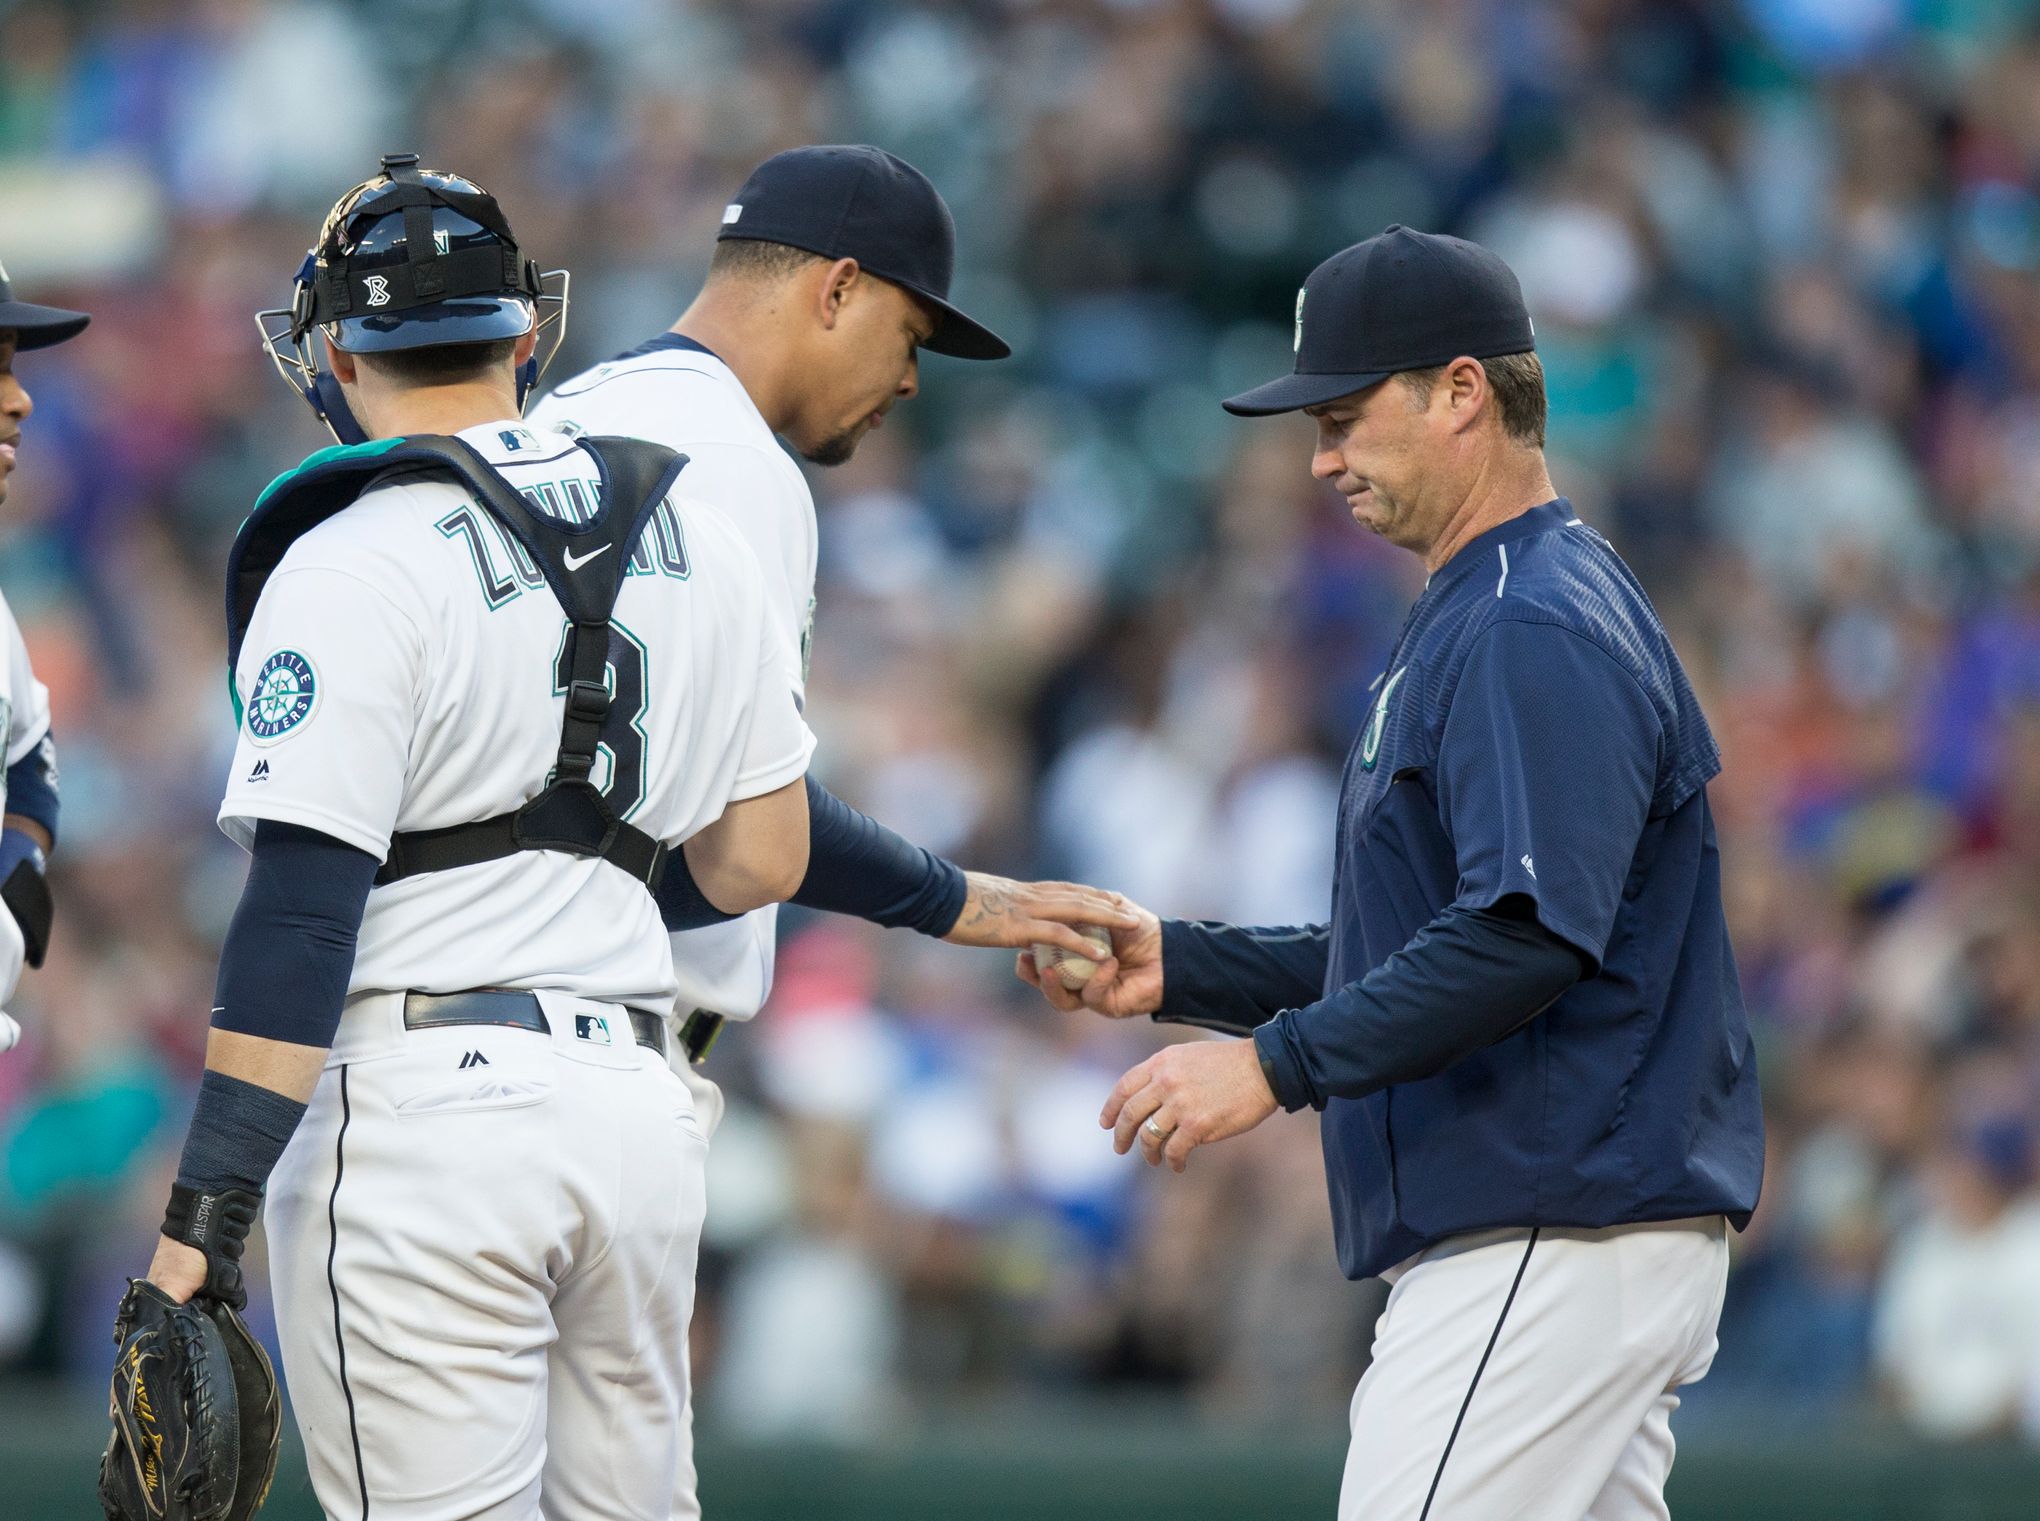 It's not always pretty, but Taijuan Walker continues to win games for